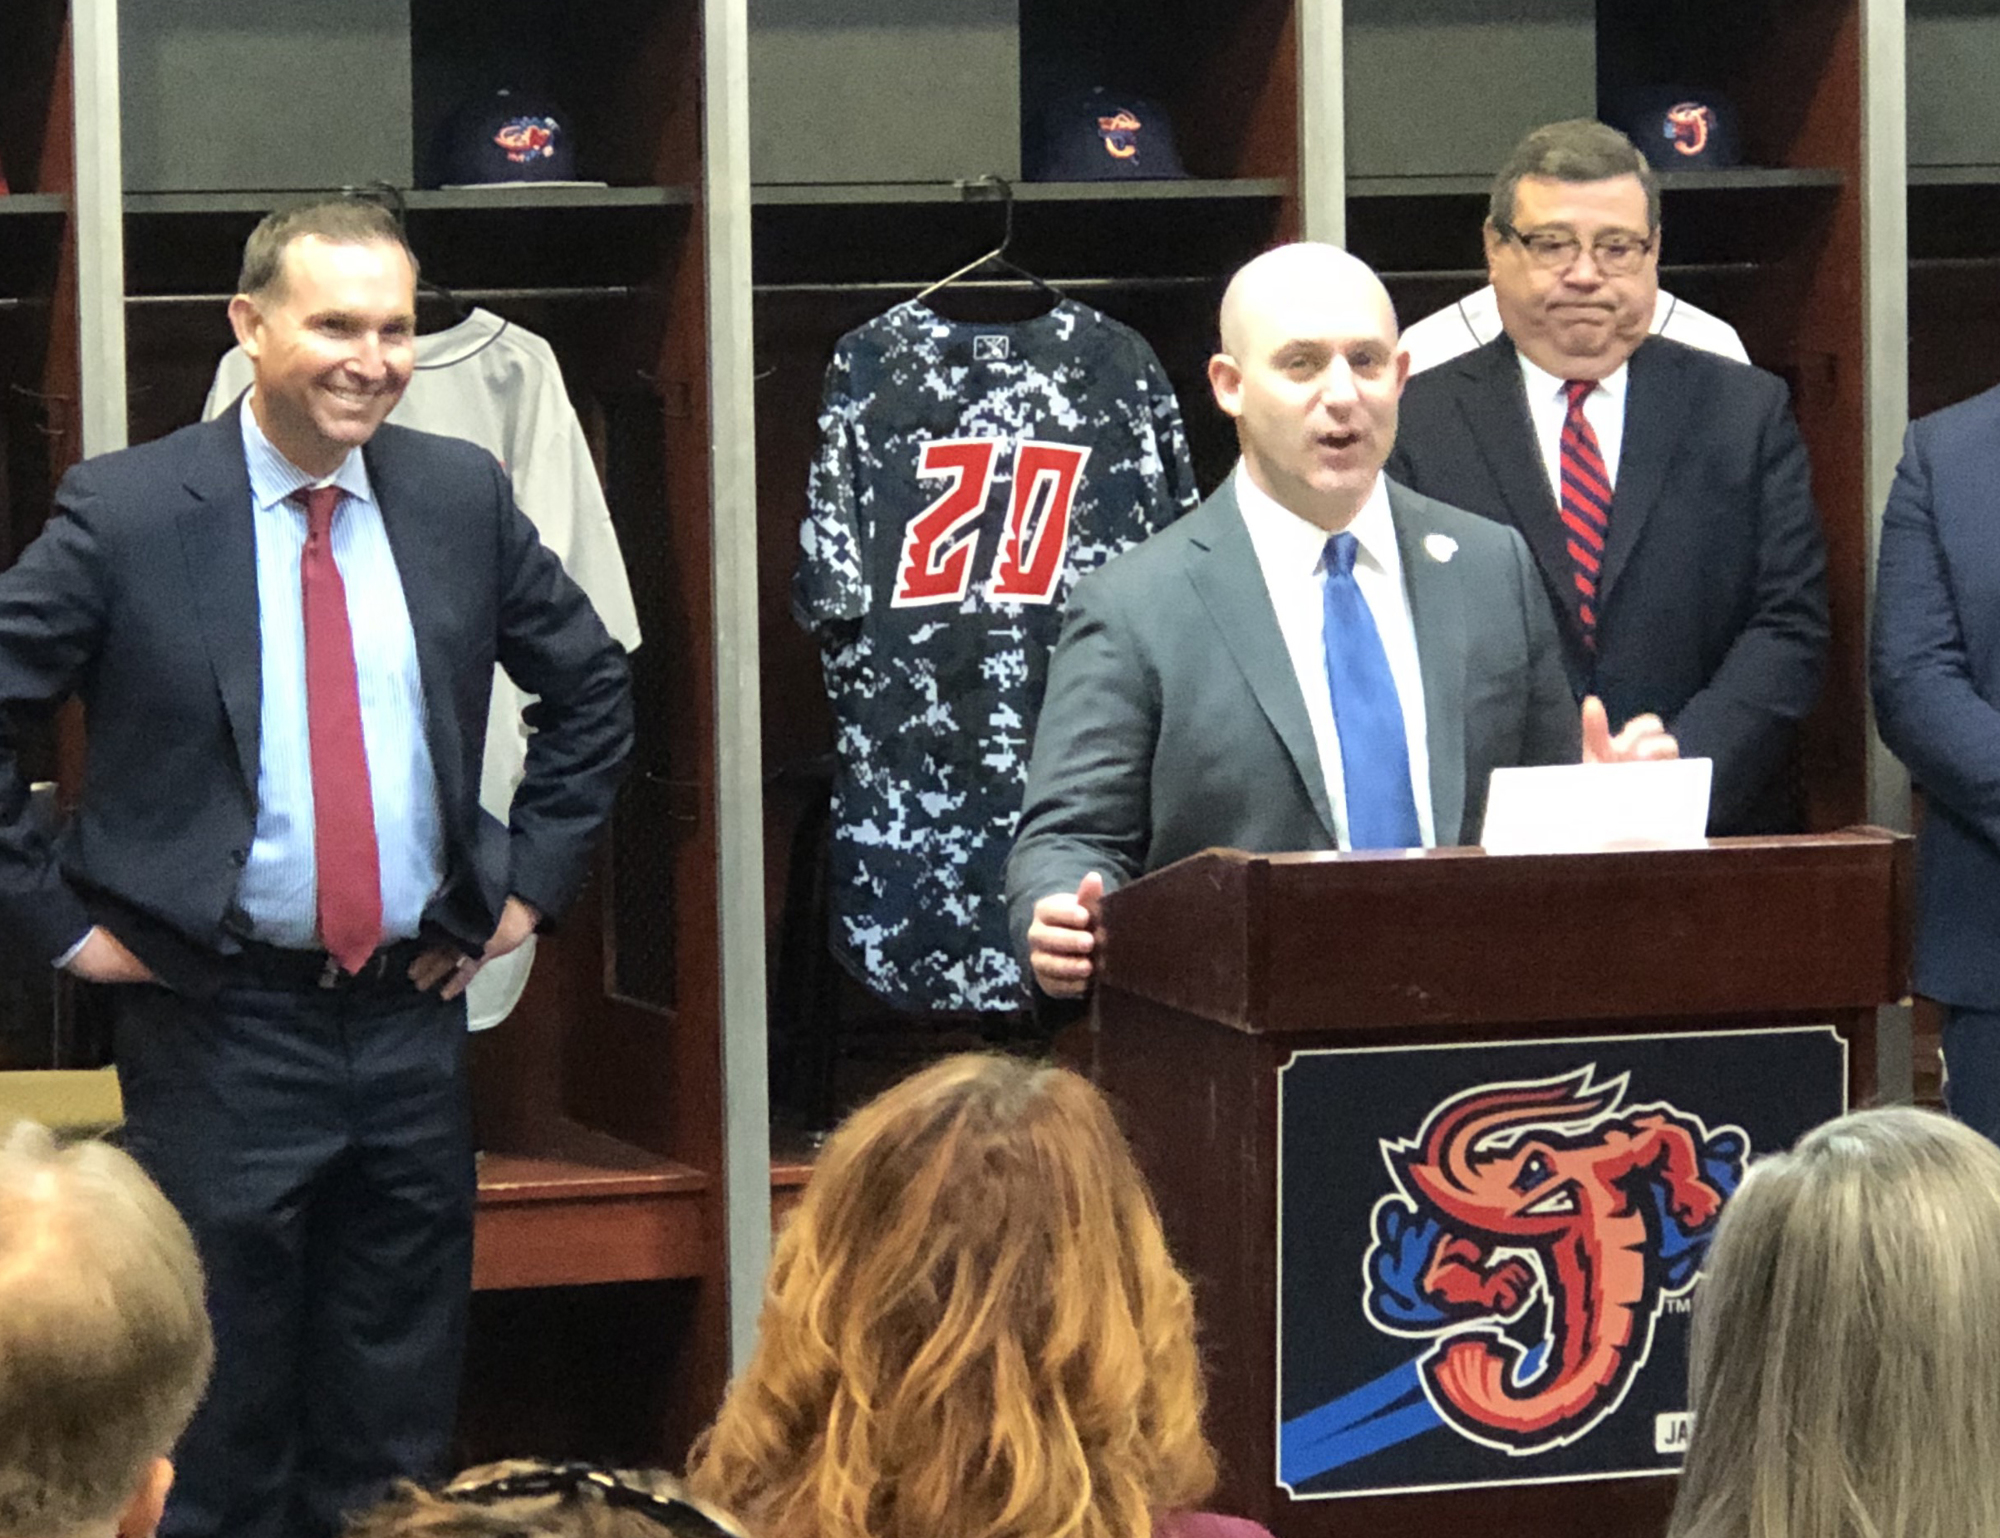 Jacksonville Mayor Lenny Curry, Jumbo Shrimp owner and CEO Ken Babby and 121 Financial Credit Union interim CEO David Marovich announce the naming rights deal Jan. 22.